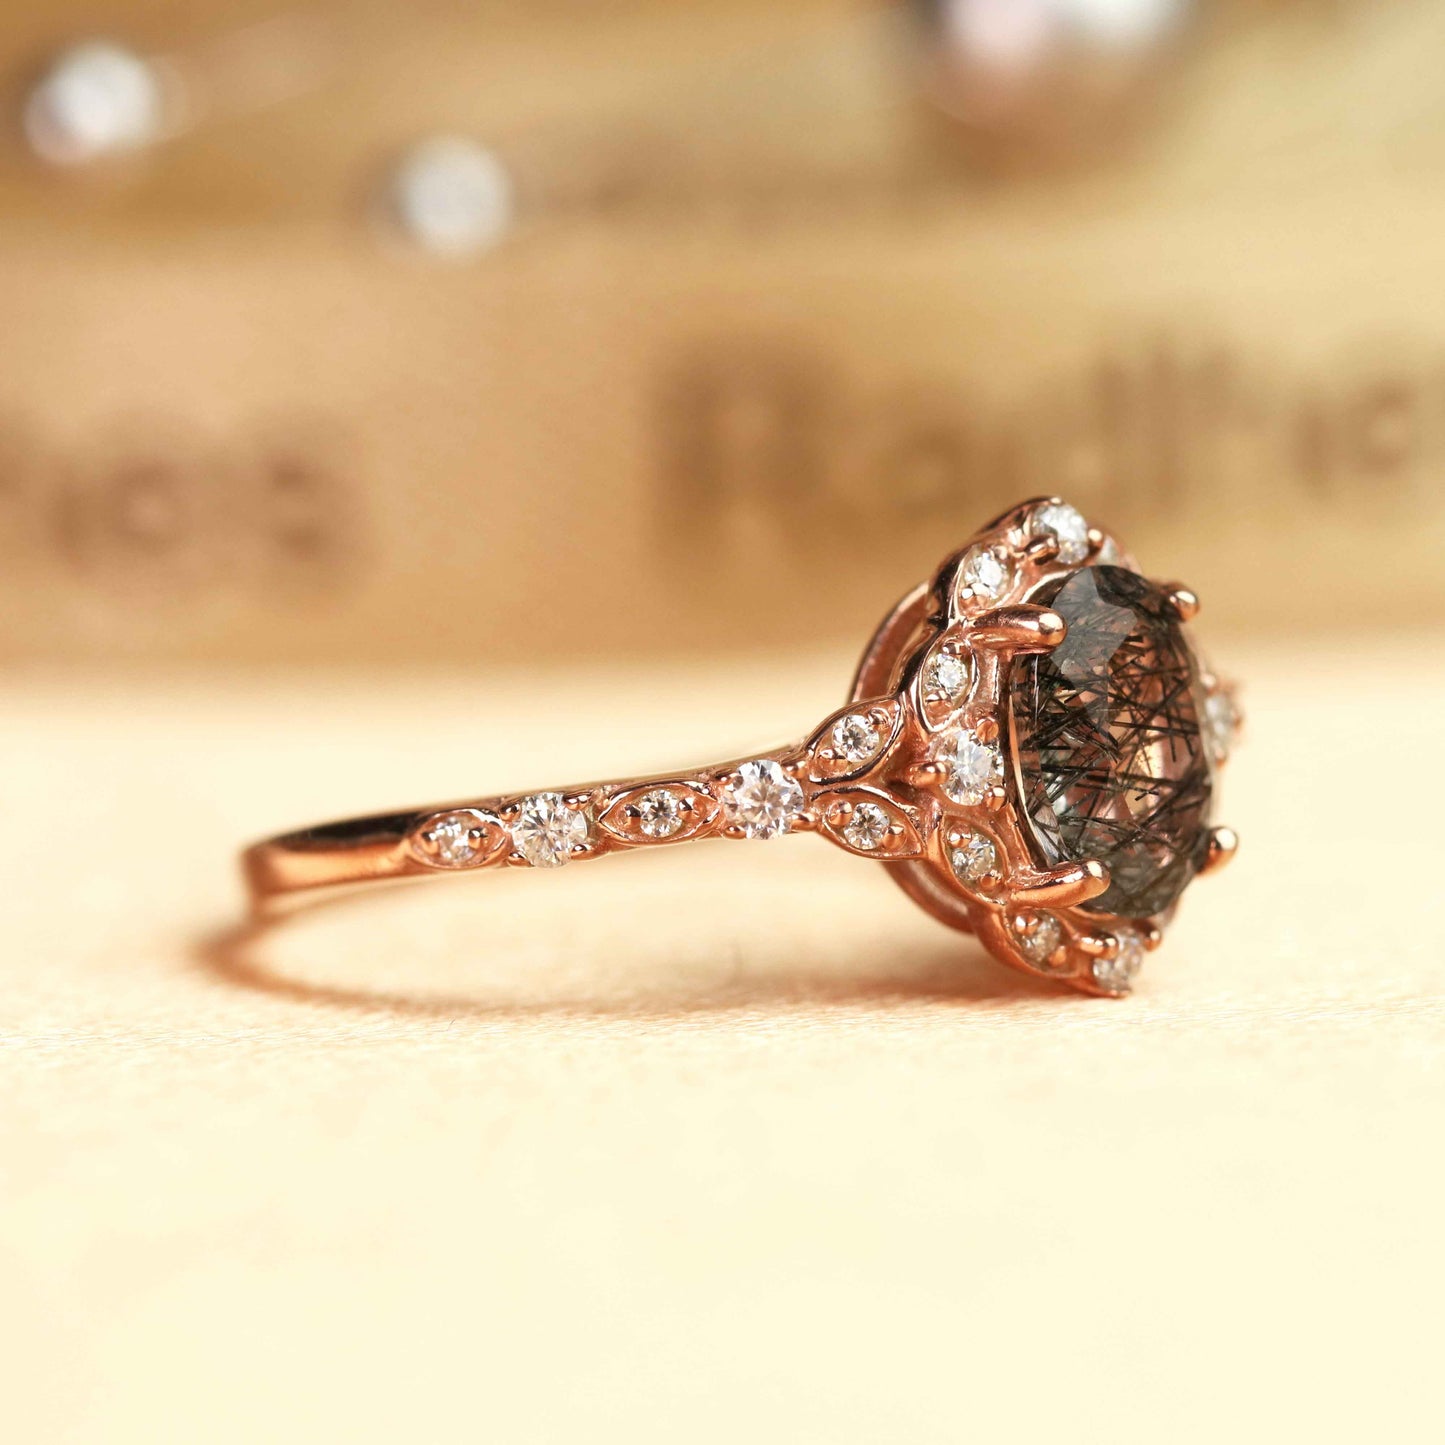 Unique Vintage 1.45 carat Oval Cut Rutilated Quartz and Diamond Halo Ring in Rose Gold